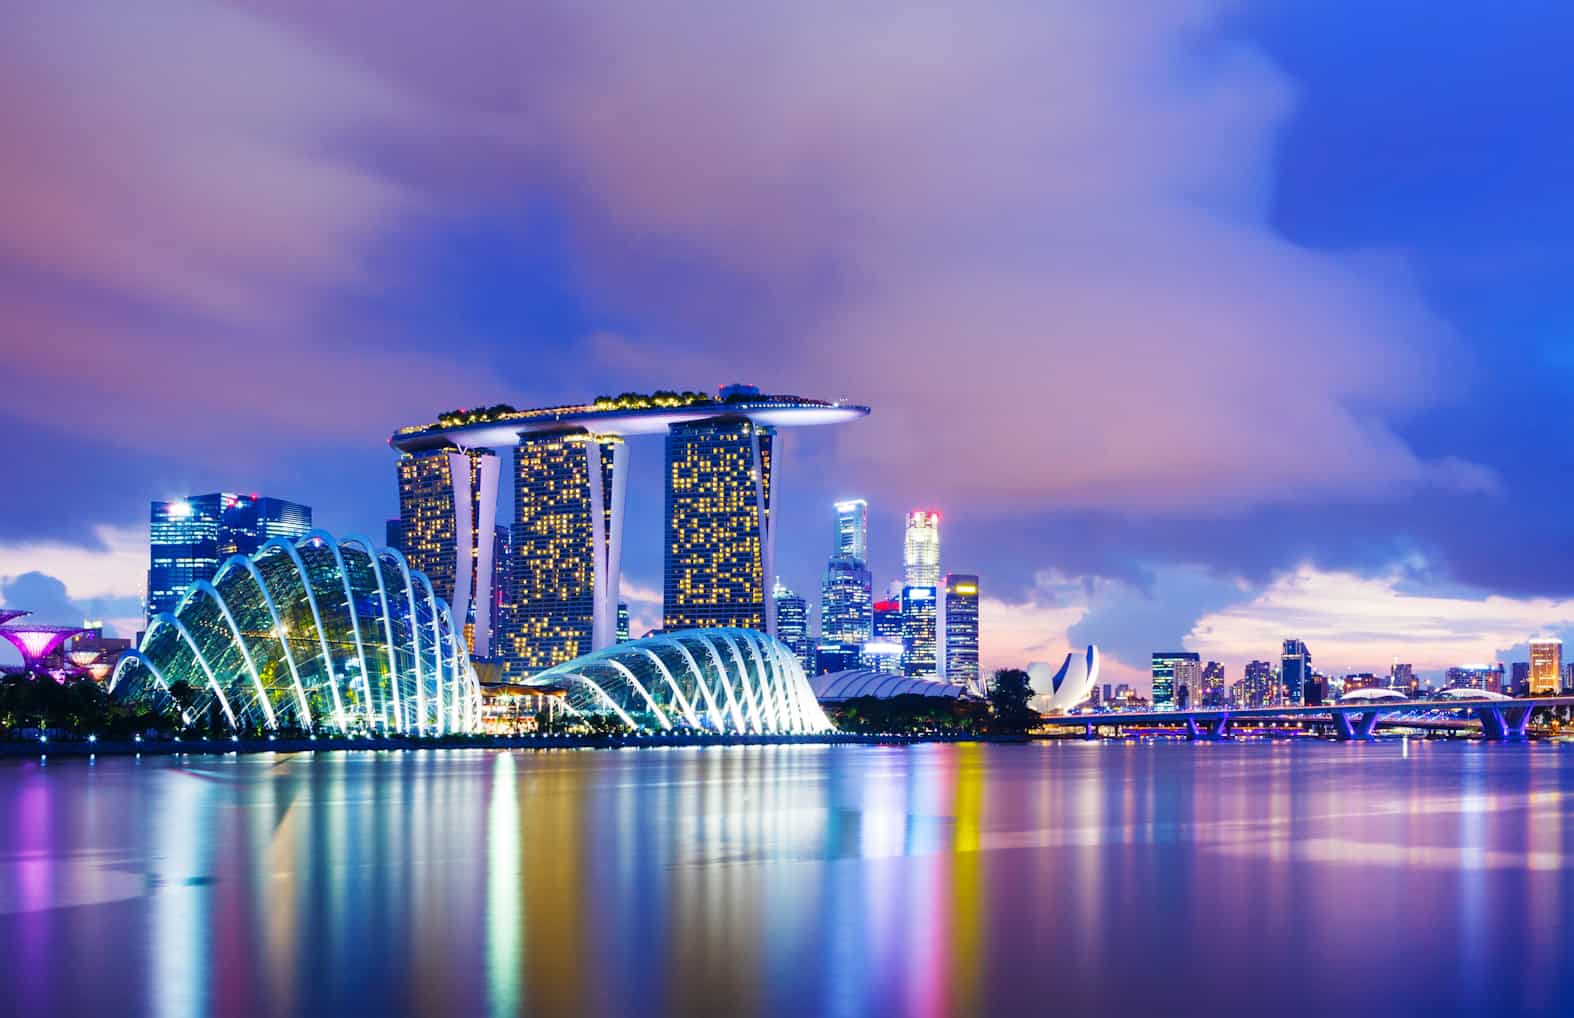 Singapore waterfront skyline, featuring sunset sky and light reflections on water. Image by ESB Professional at Shuttestock